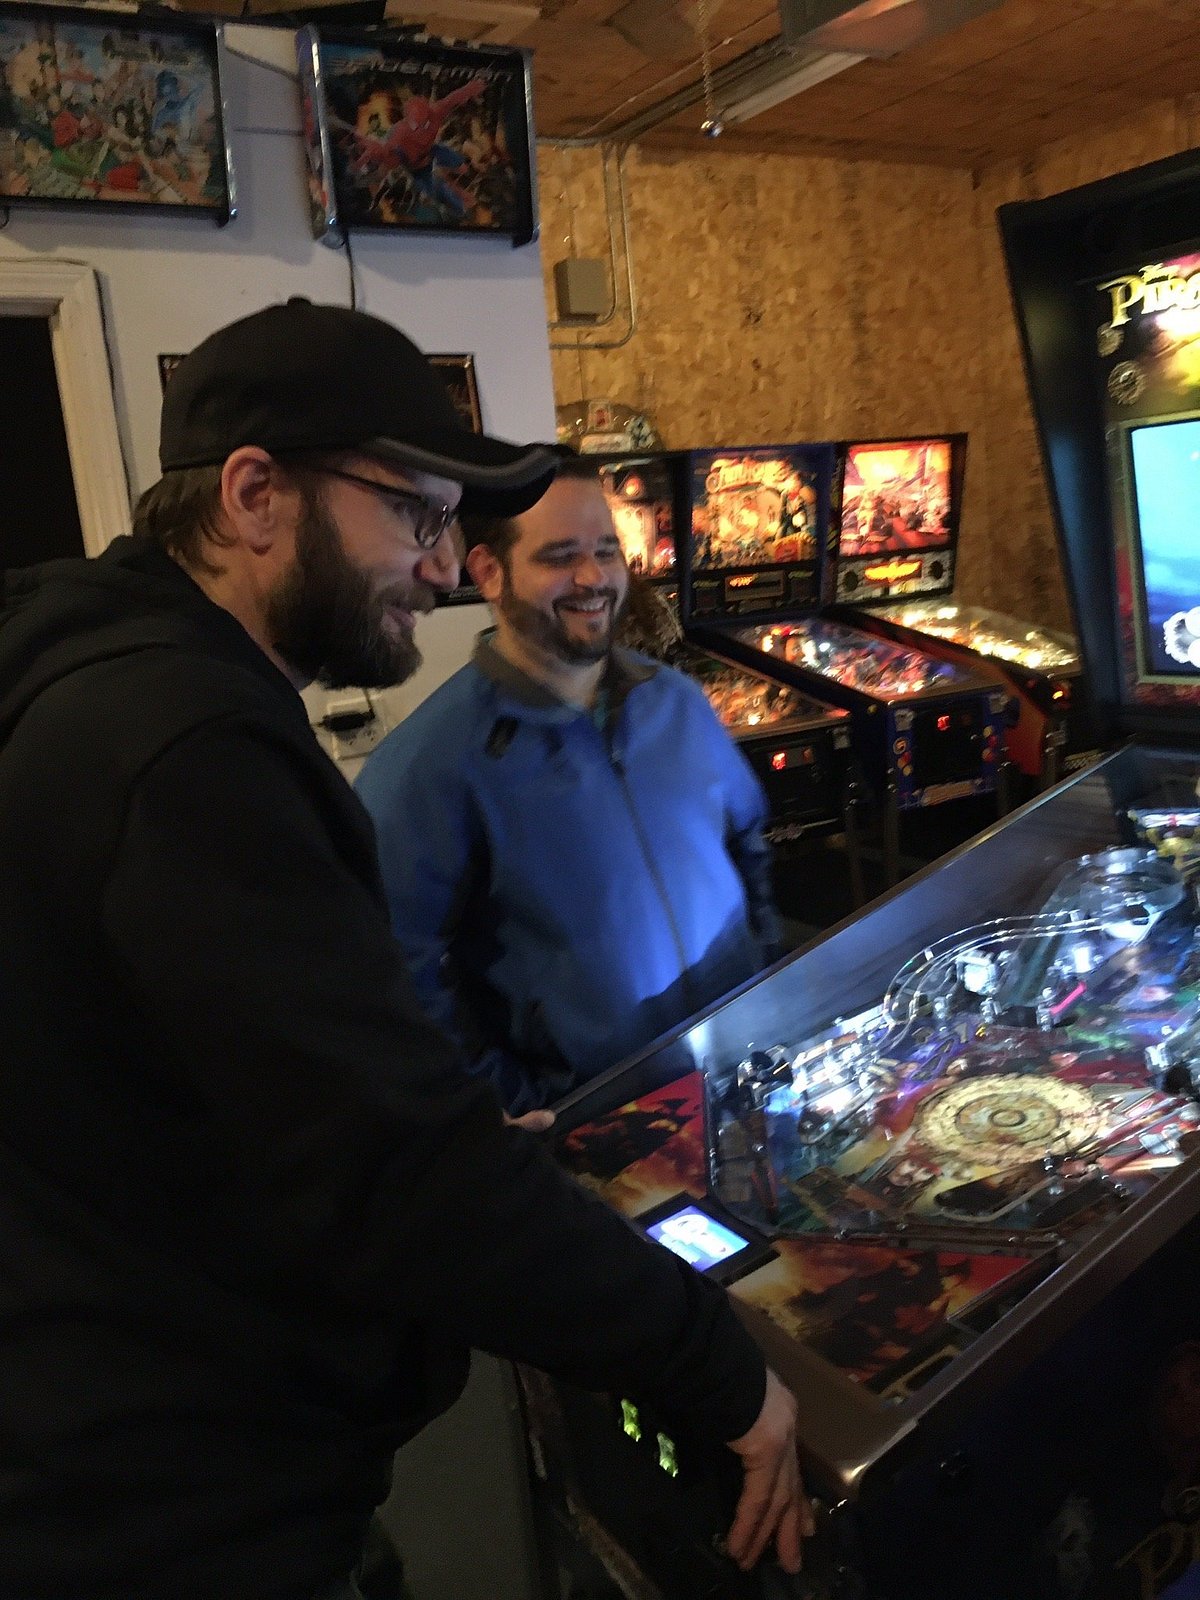 THIS WEEK IN PINBALL: February 4th, 2019 - This Week in Pinball